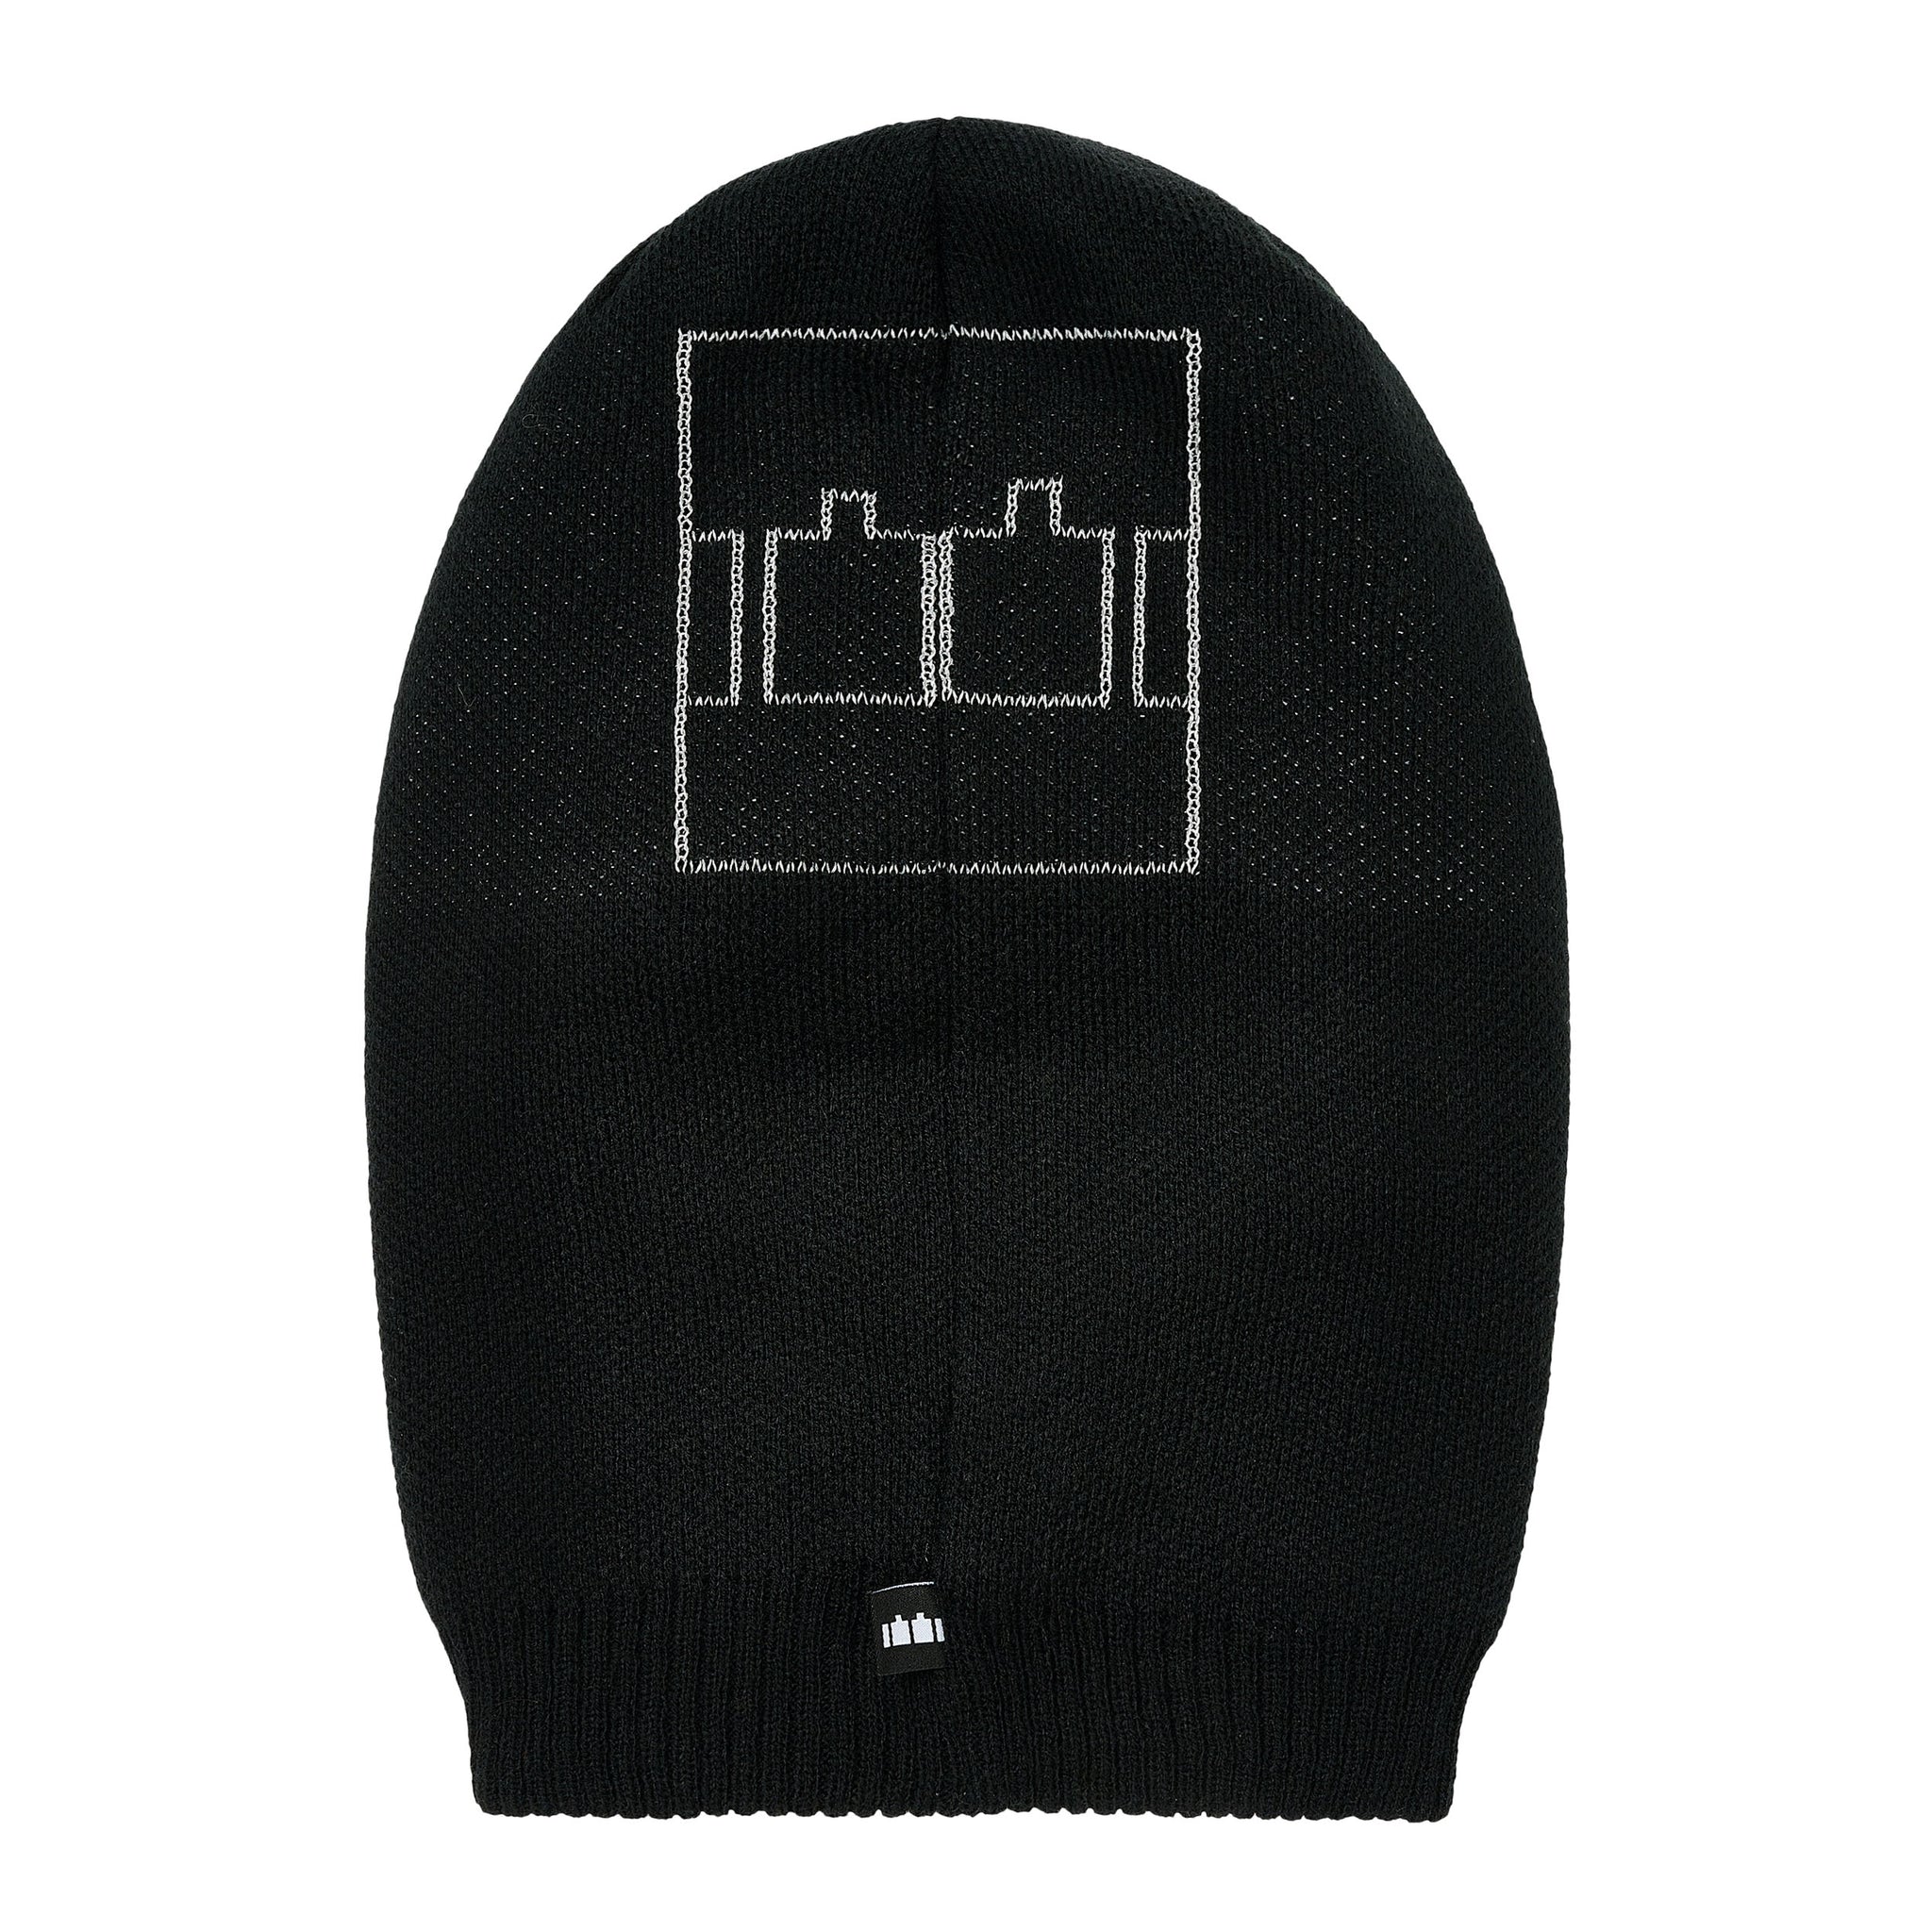 The Trilogy Tapes Reversible Knitted Hood Black